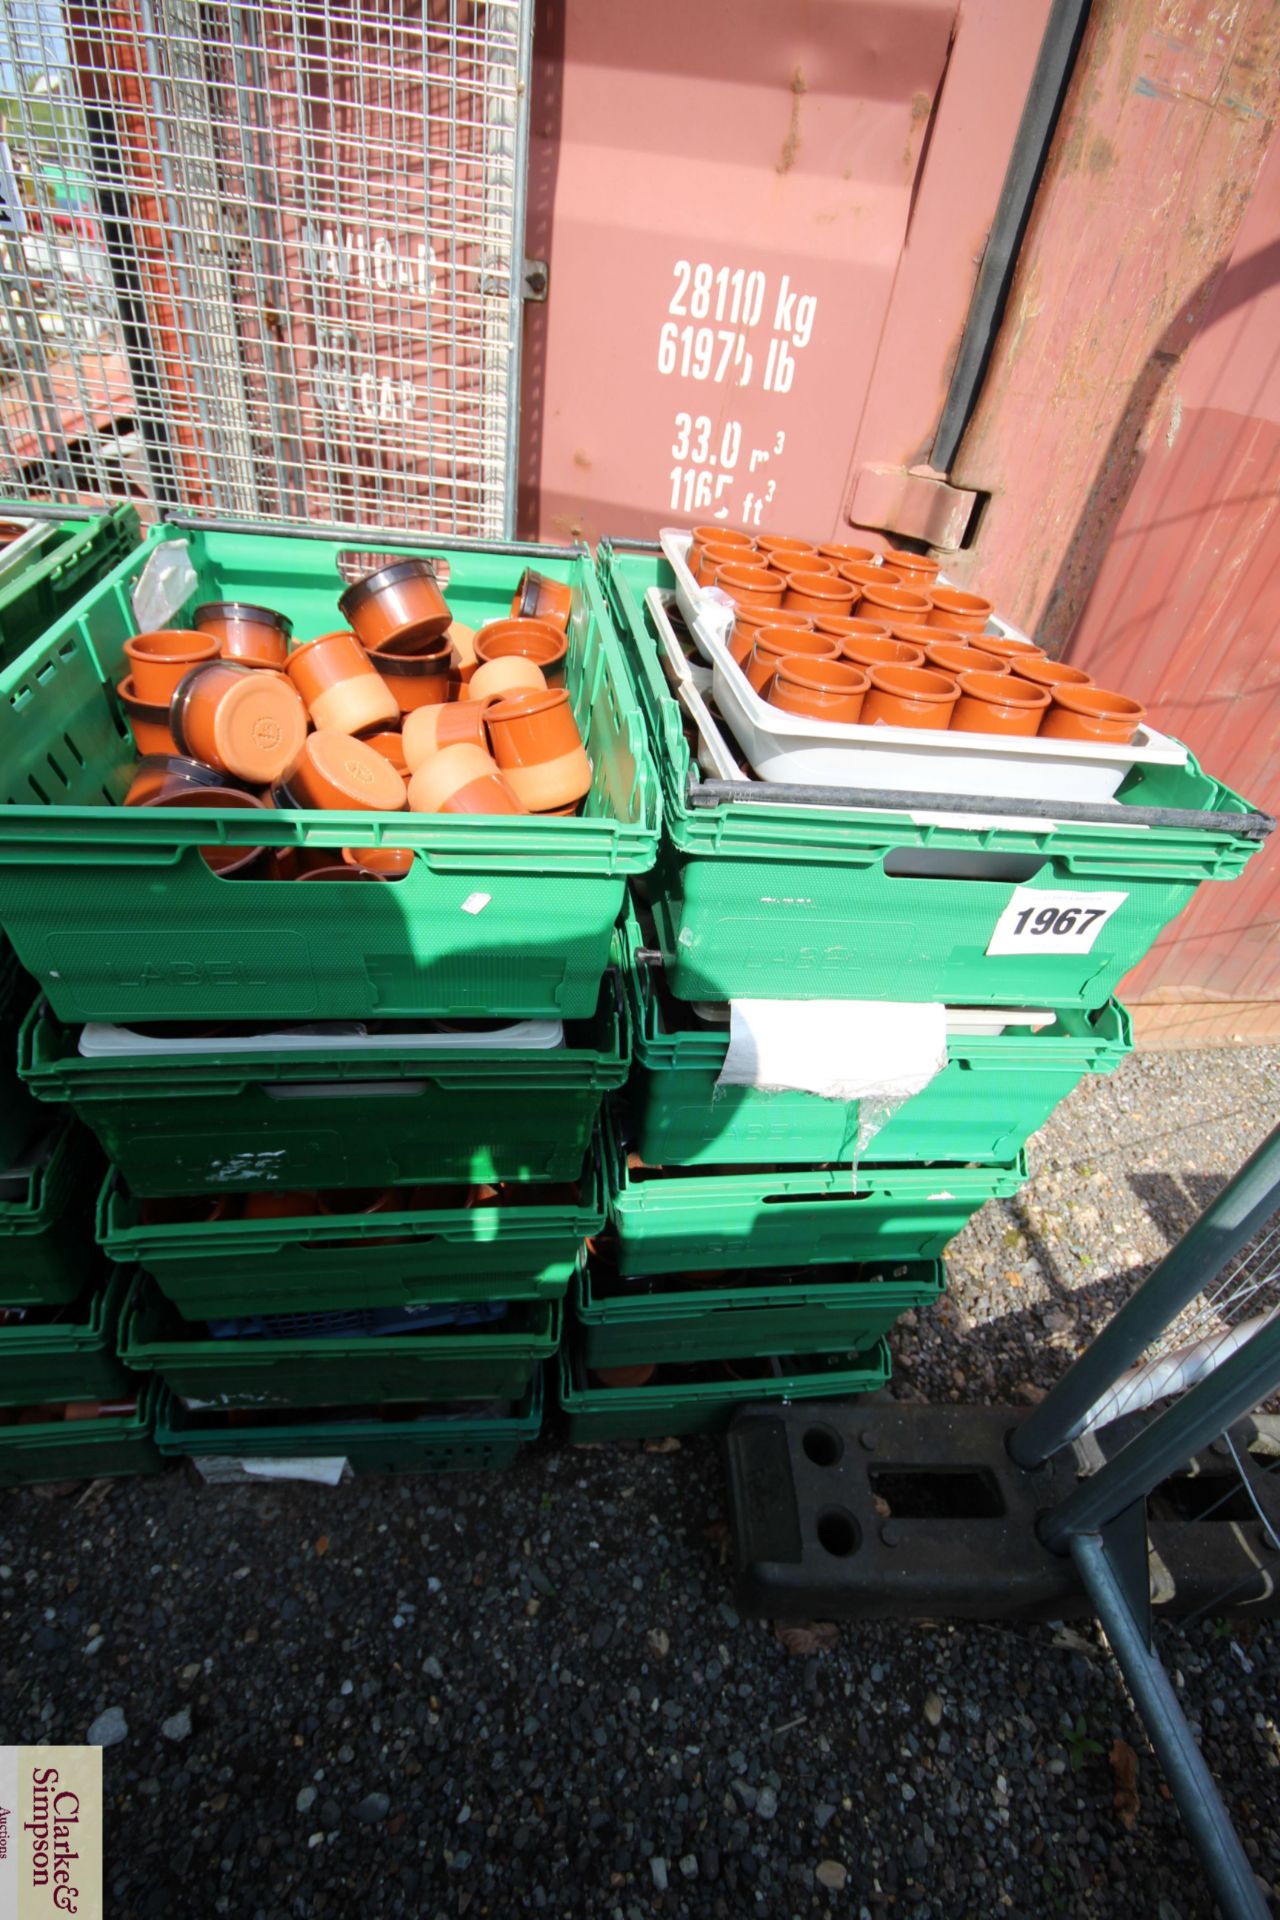 10x stacking vegetable crates. Containing a large